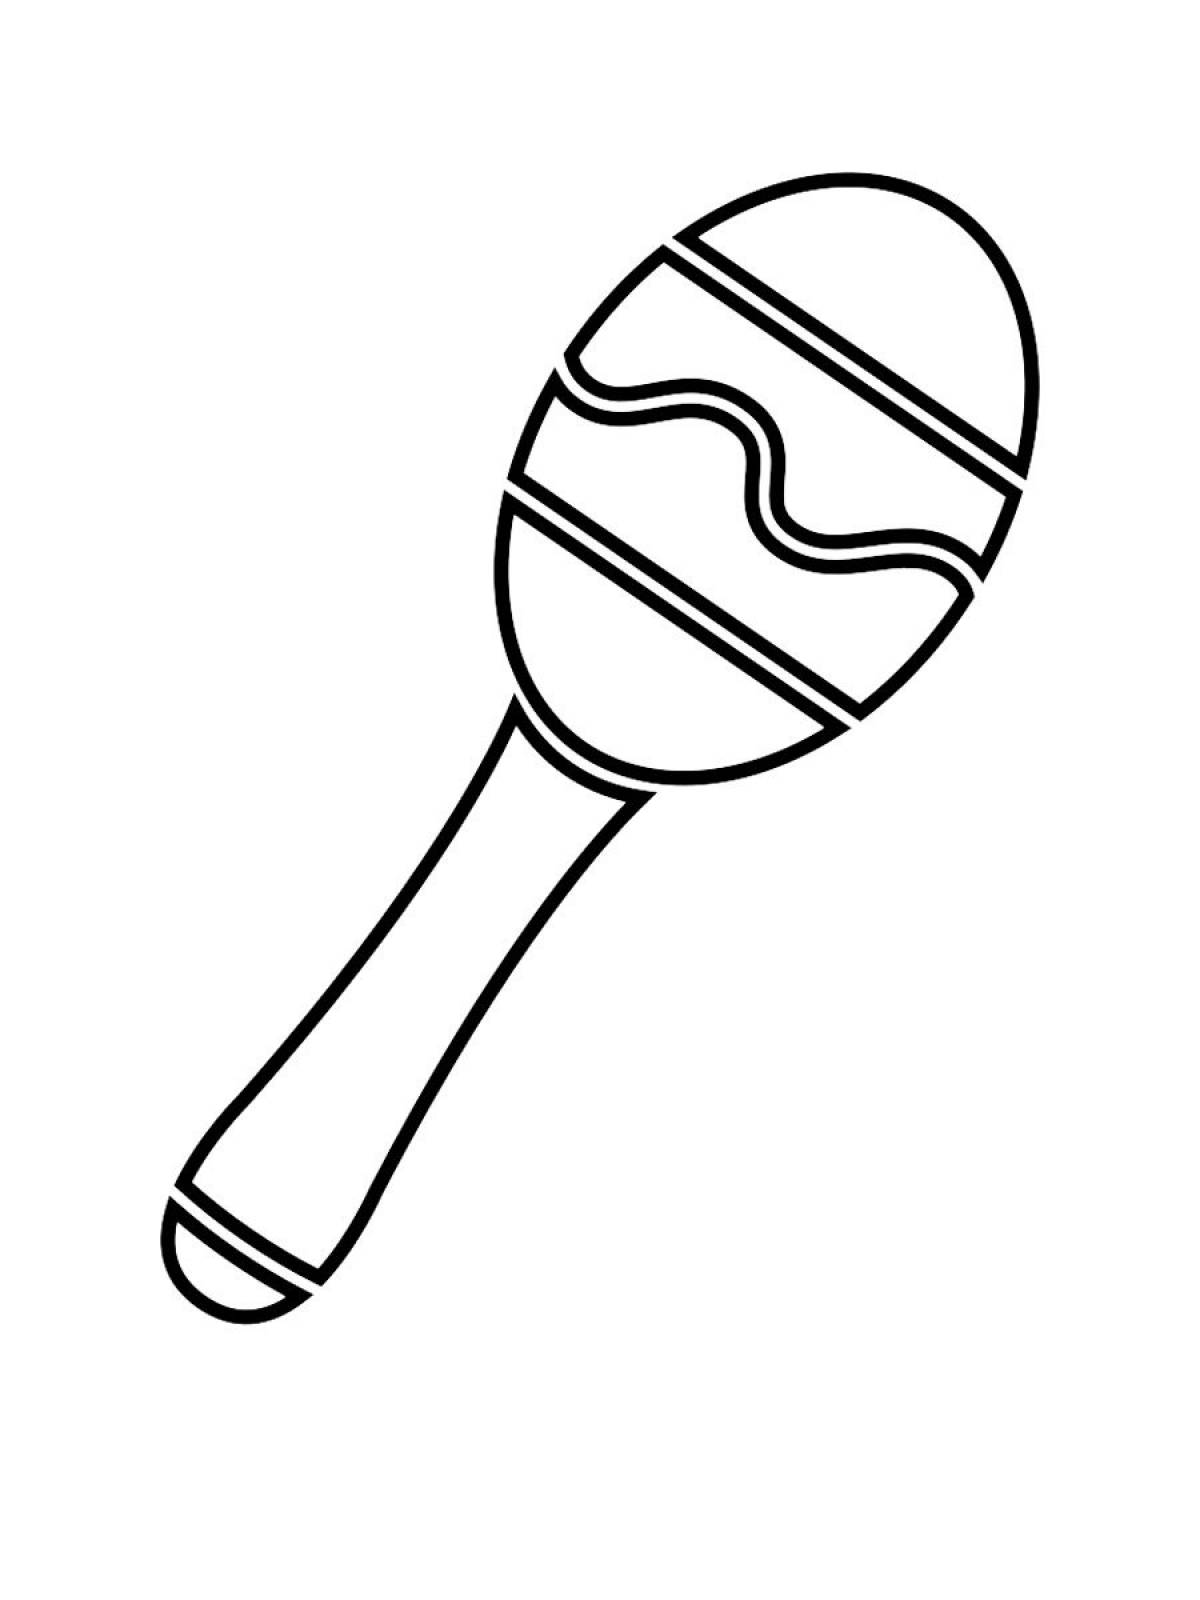 Perfect rattle coloring page for juniors